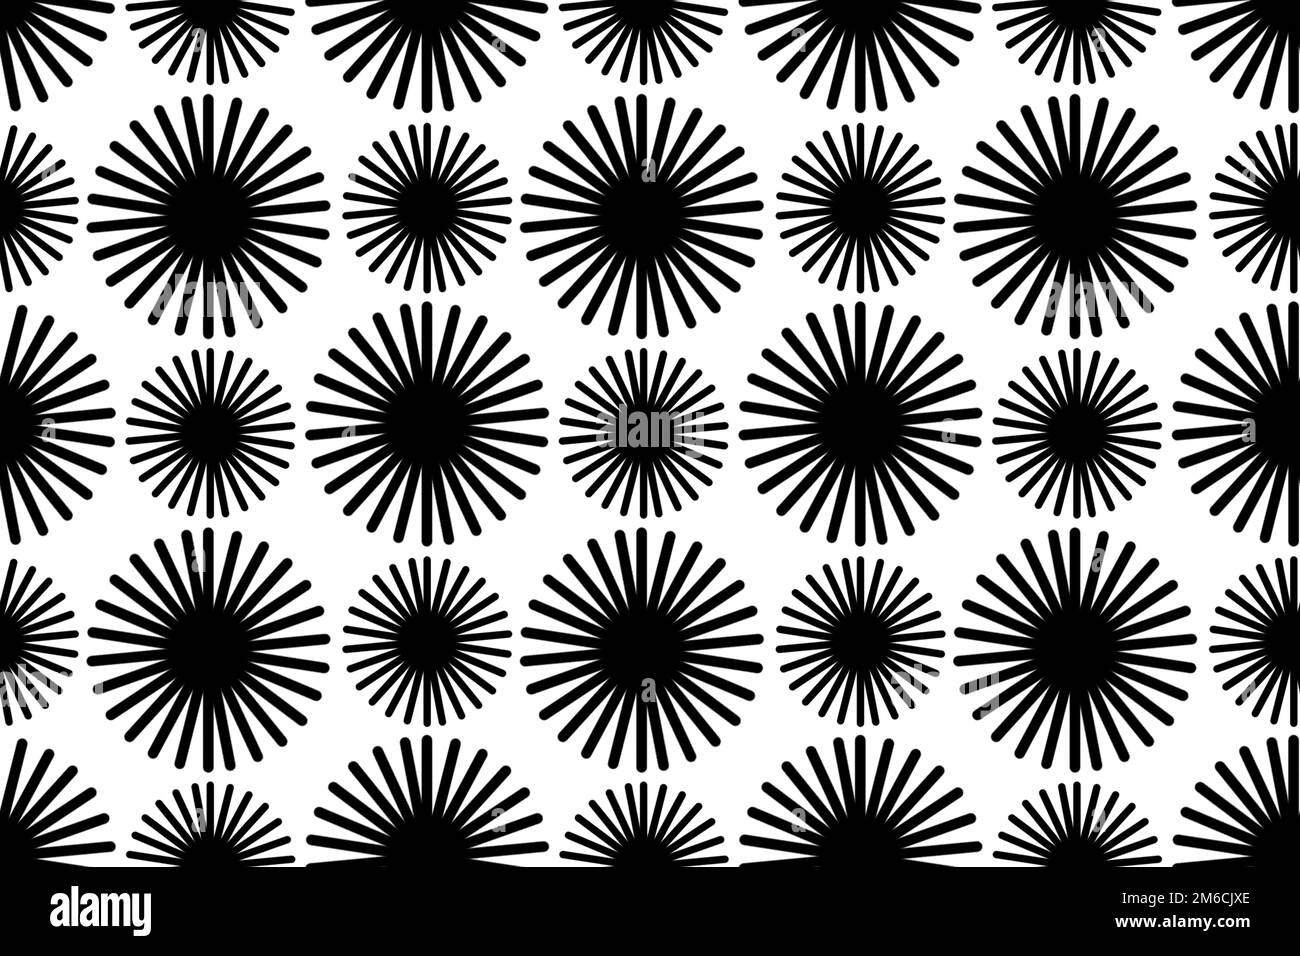 Abstract seamless pattern of black circles with rays on white background Stock Photo